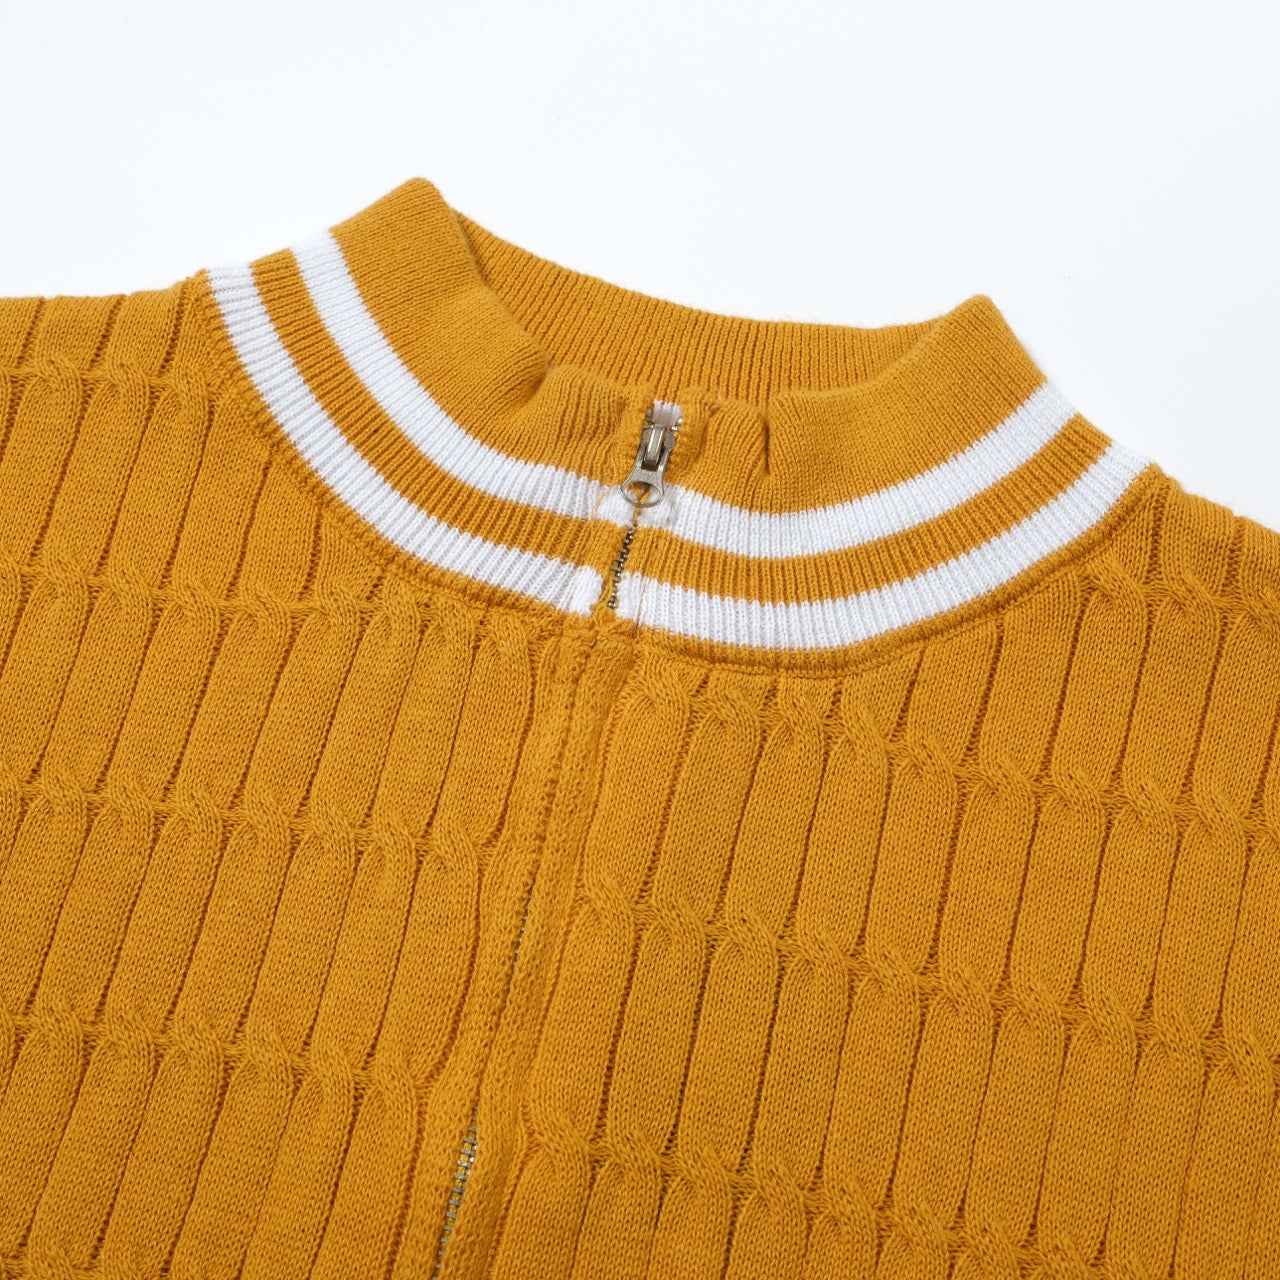 OXKNIT Men Vintage Clothing 1960s Mod Style Casual Yellow Knitted Knit Retro T-Shirt